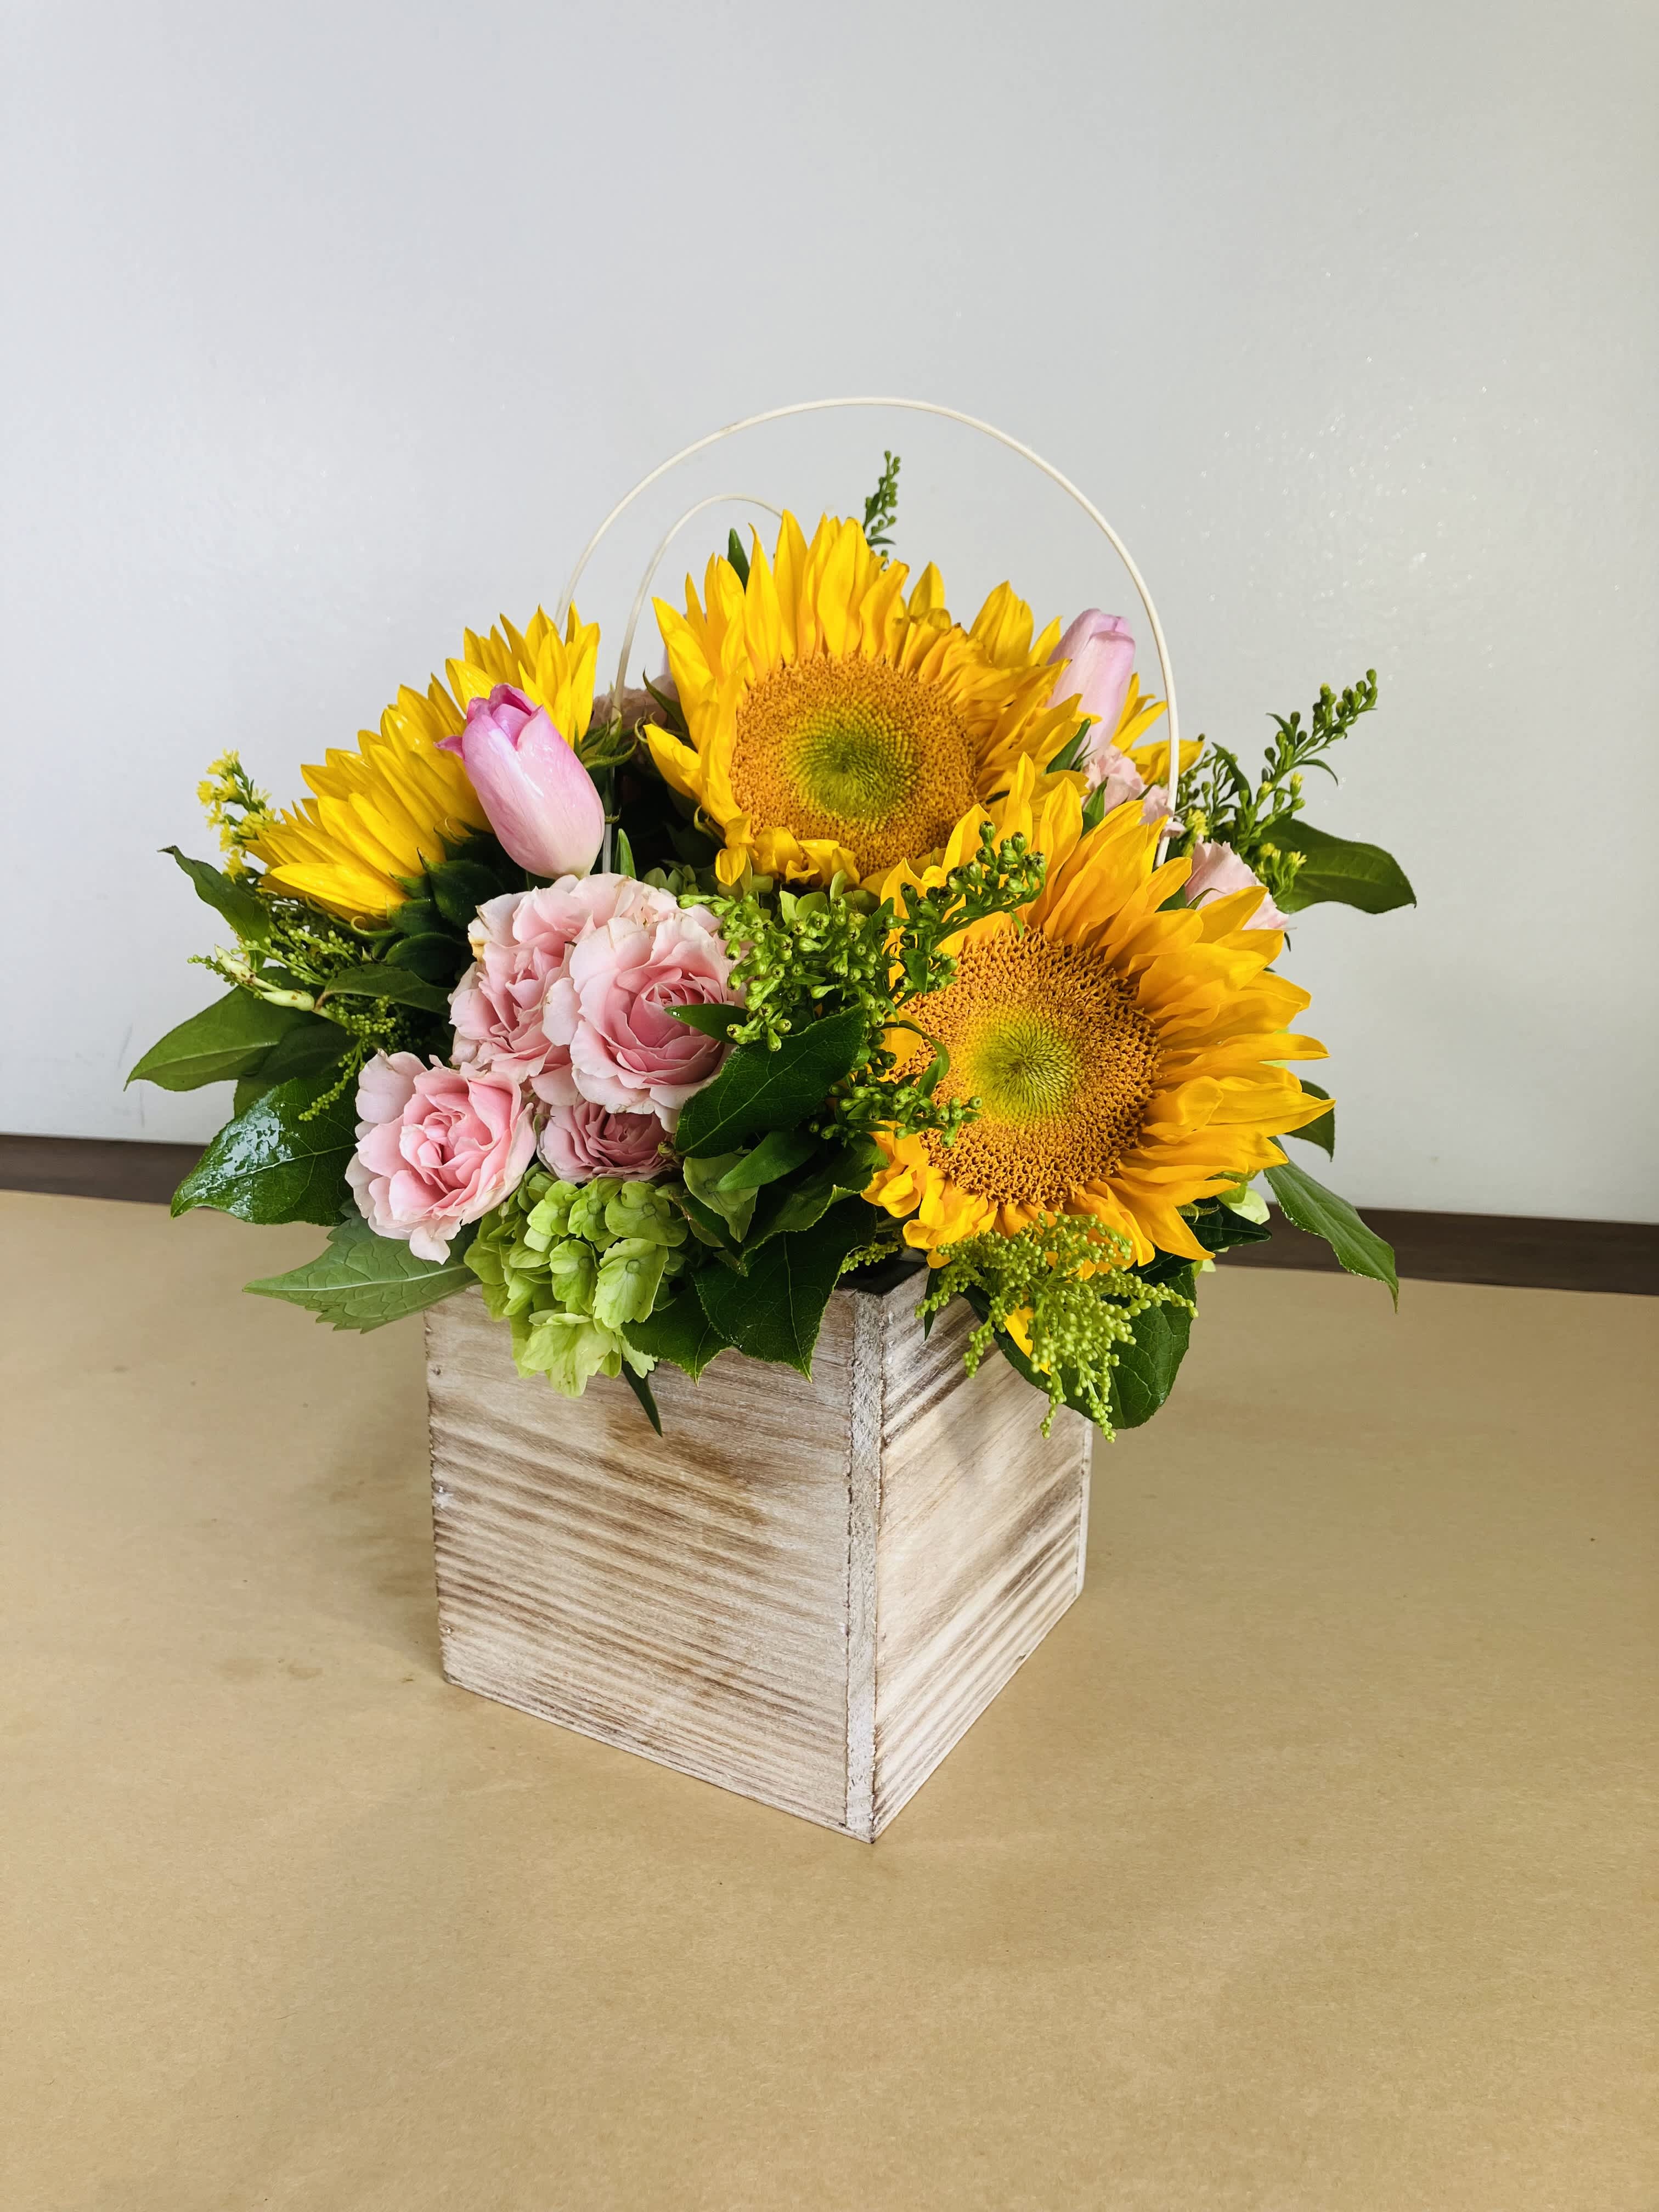 Sweet Sunflowers  - The Sweet Sunflowers Bouquet is a vibrant and an inspiring arrangement featuring sunflowers, pink spray roses, tulips, green hydrangeas, fresh greenery in a wonderfully fragrant cedar box.